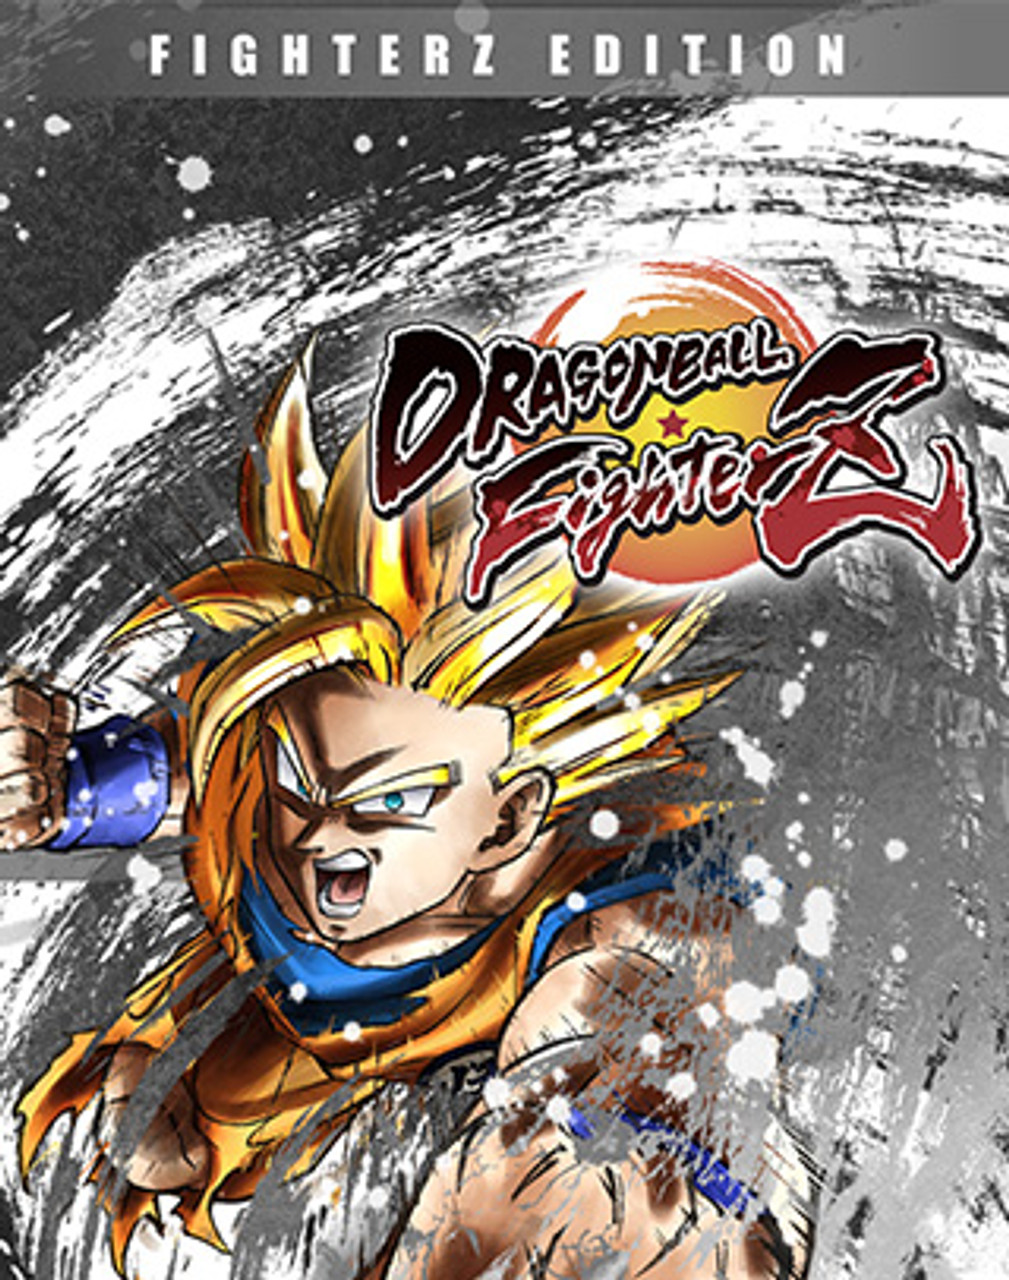 Dragon Ball Fighter Z - Download